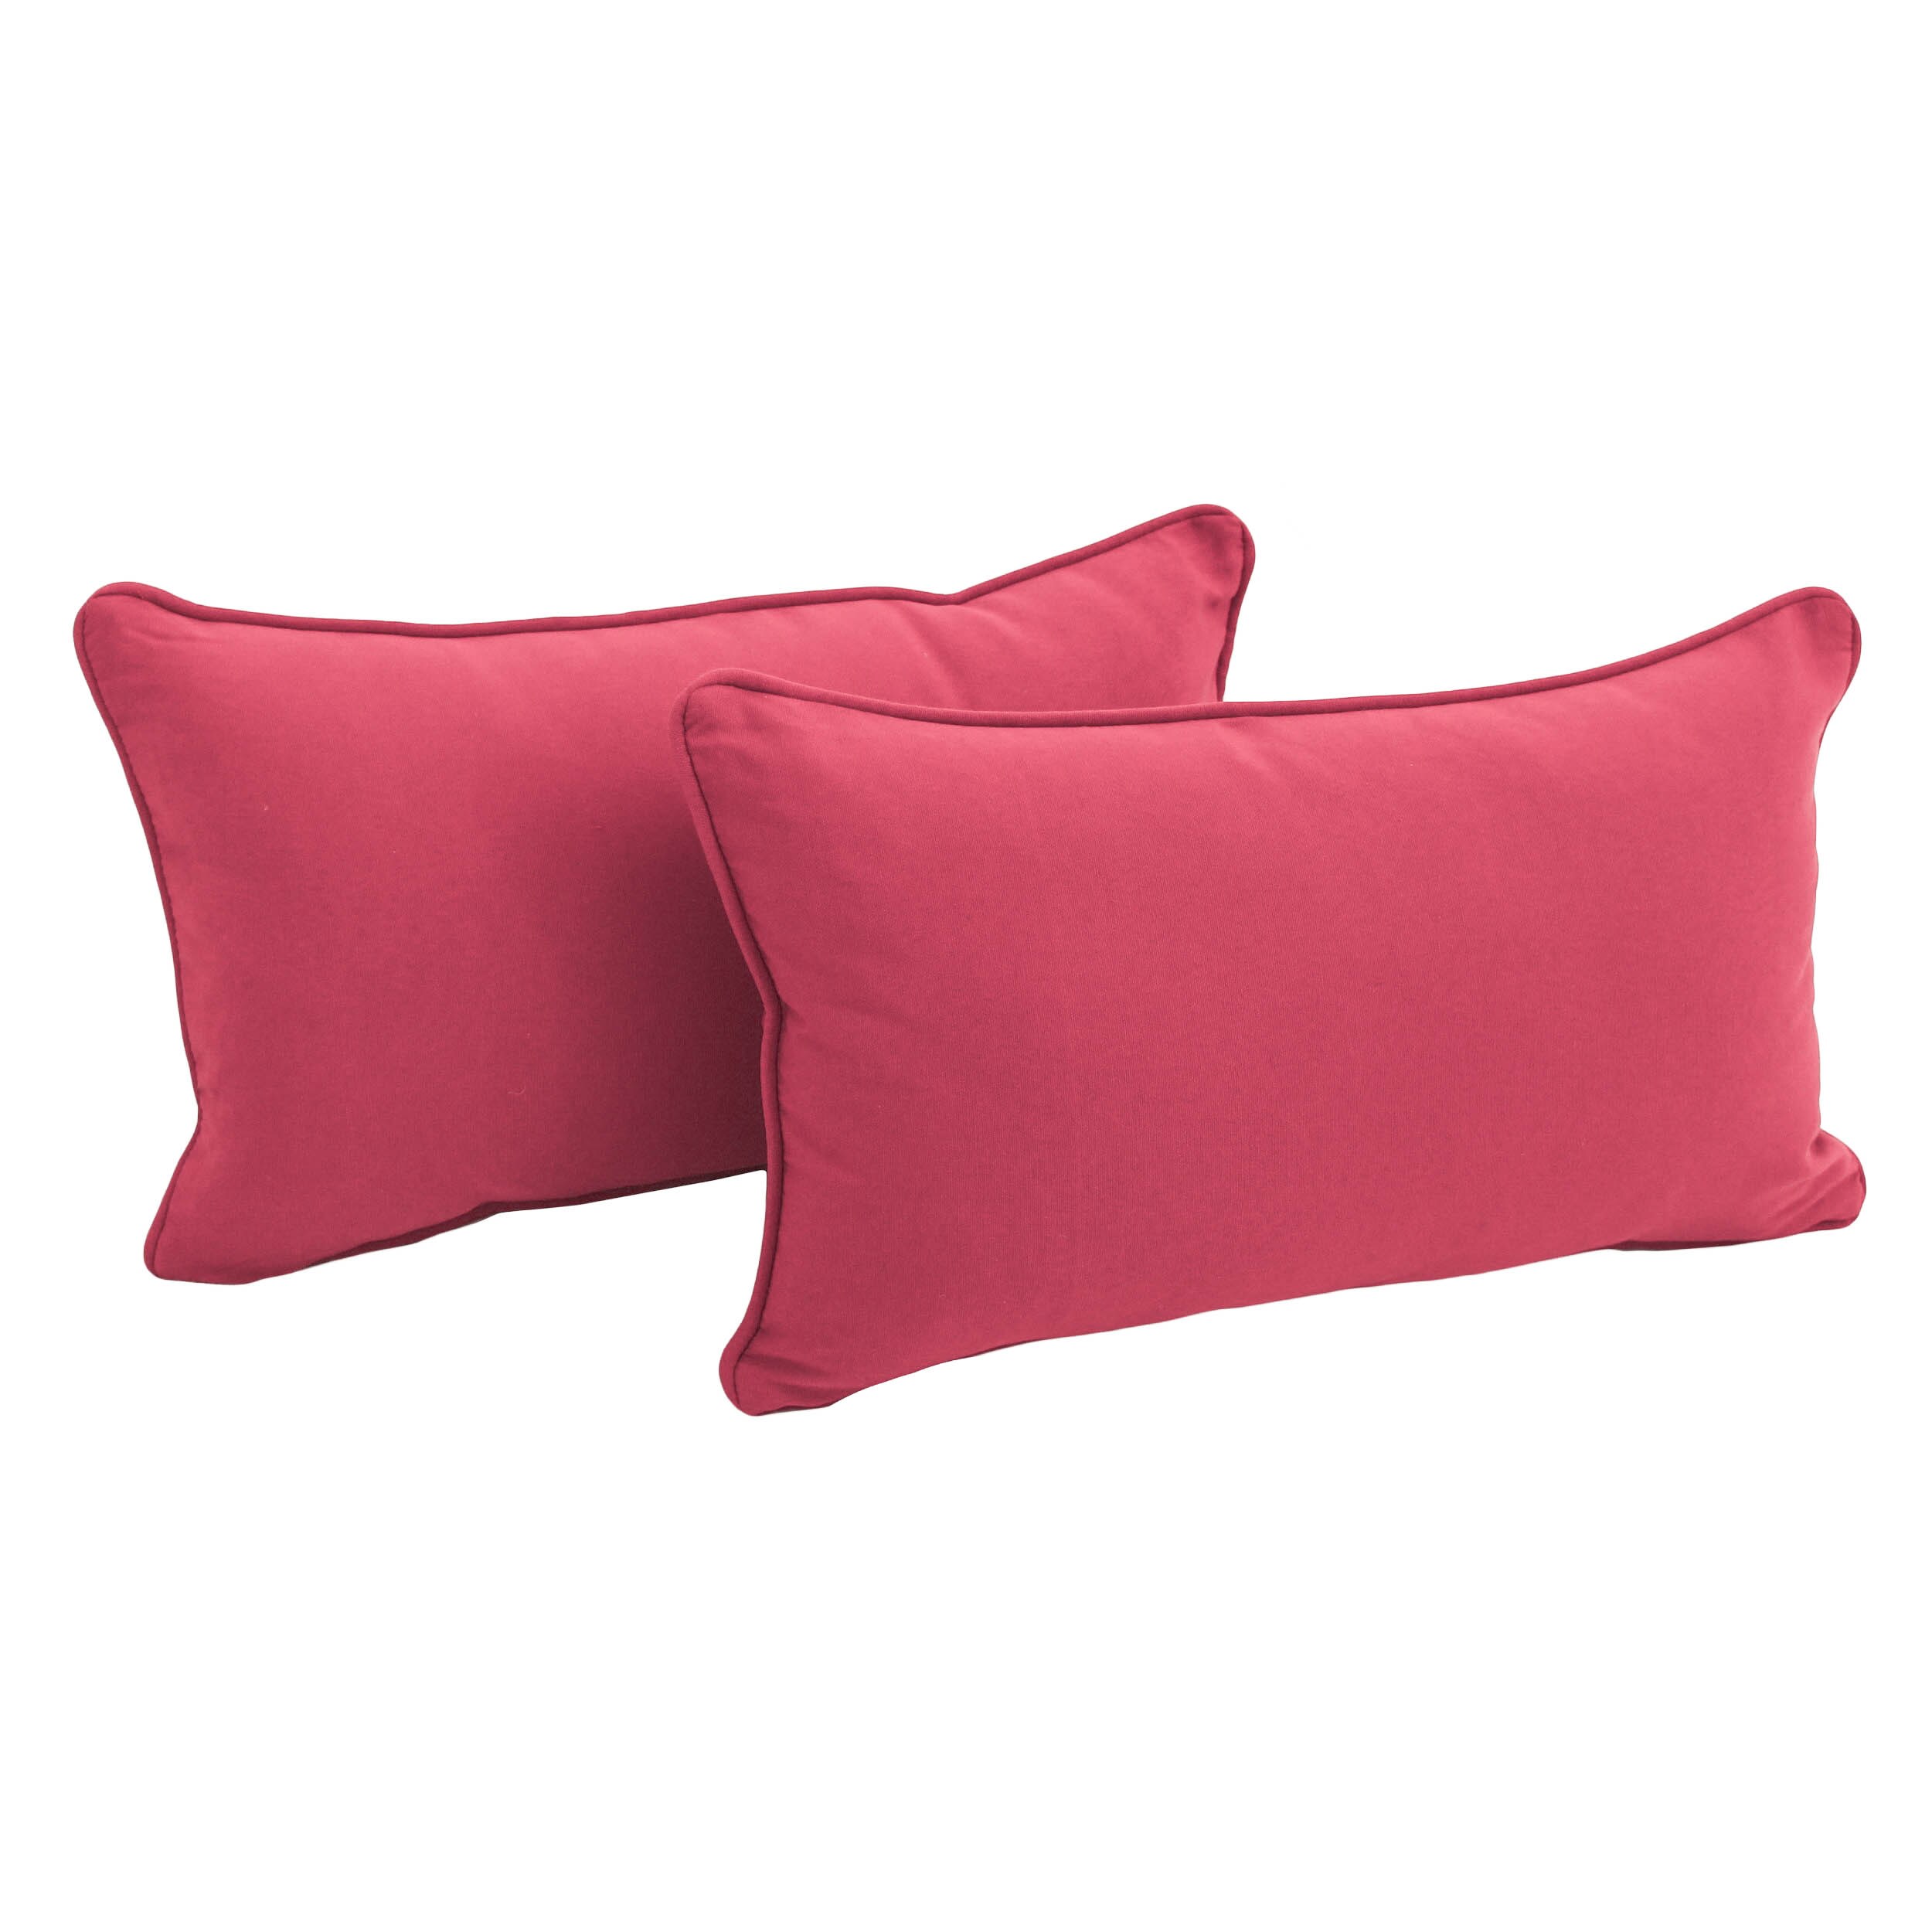 Blazing Needles 20-inch by 12-Inch Double-Corded Solid Twill Back Support Pillows with Inserts (Set of 2) - Bery Berry